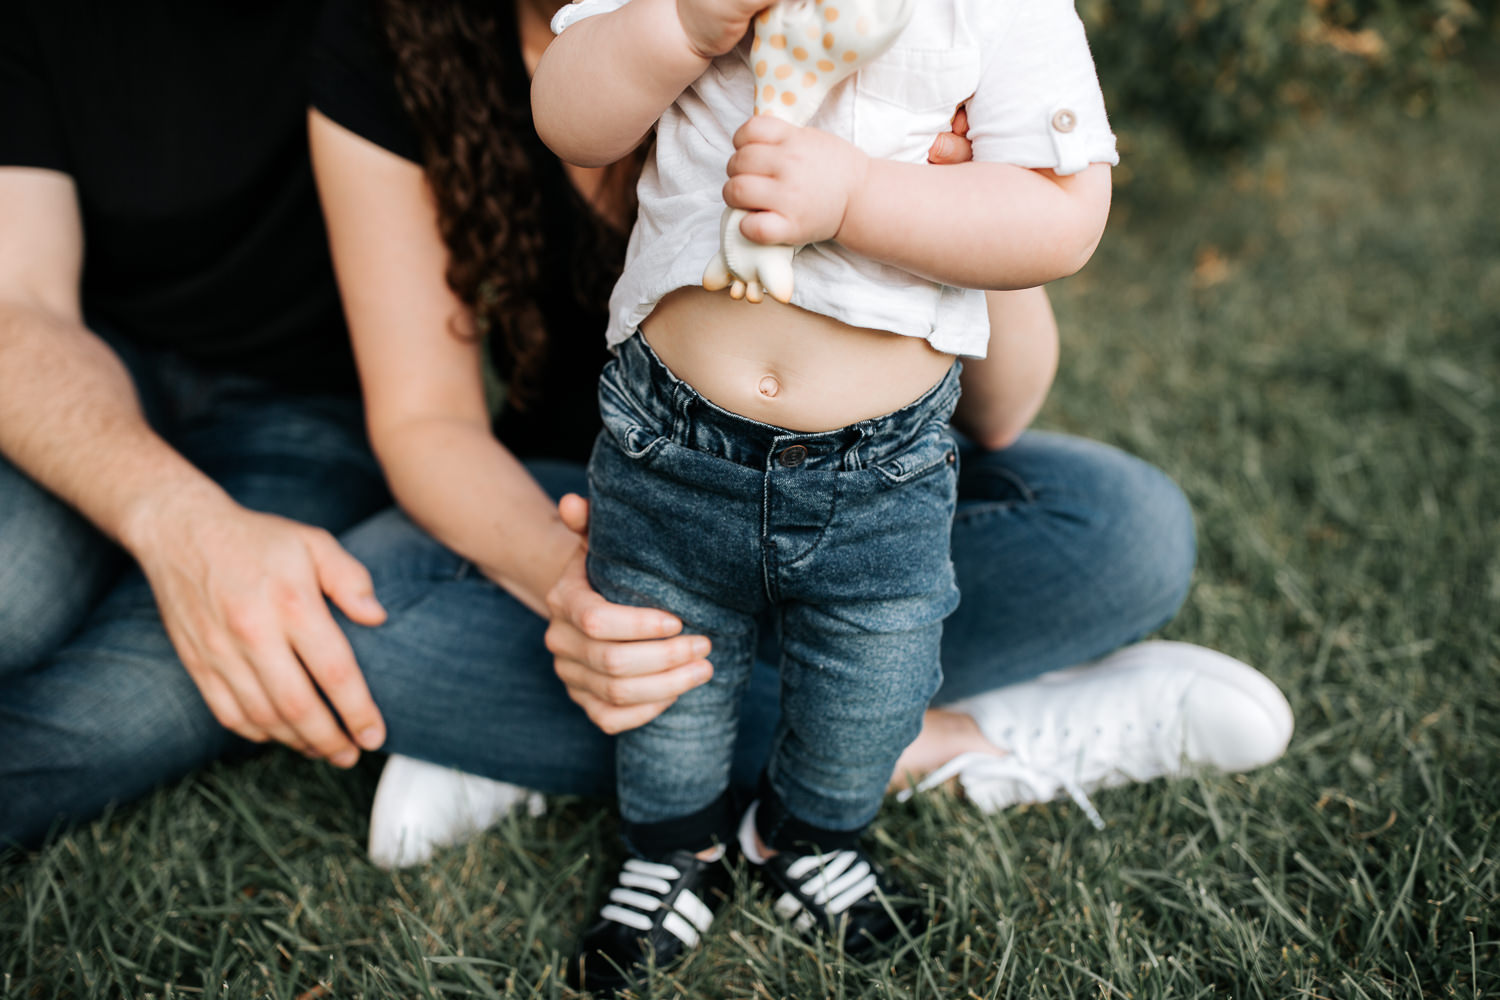 9 month old baby boy in white t-shirt, jeans and sneakers standing holding Sophie the giraffe, mom and dad sitting behind son, close up of bellybutton - Newmarket Lifestyle Photography